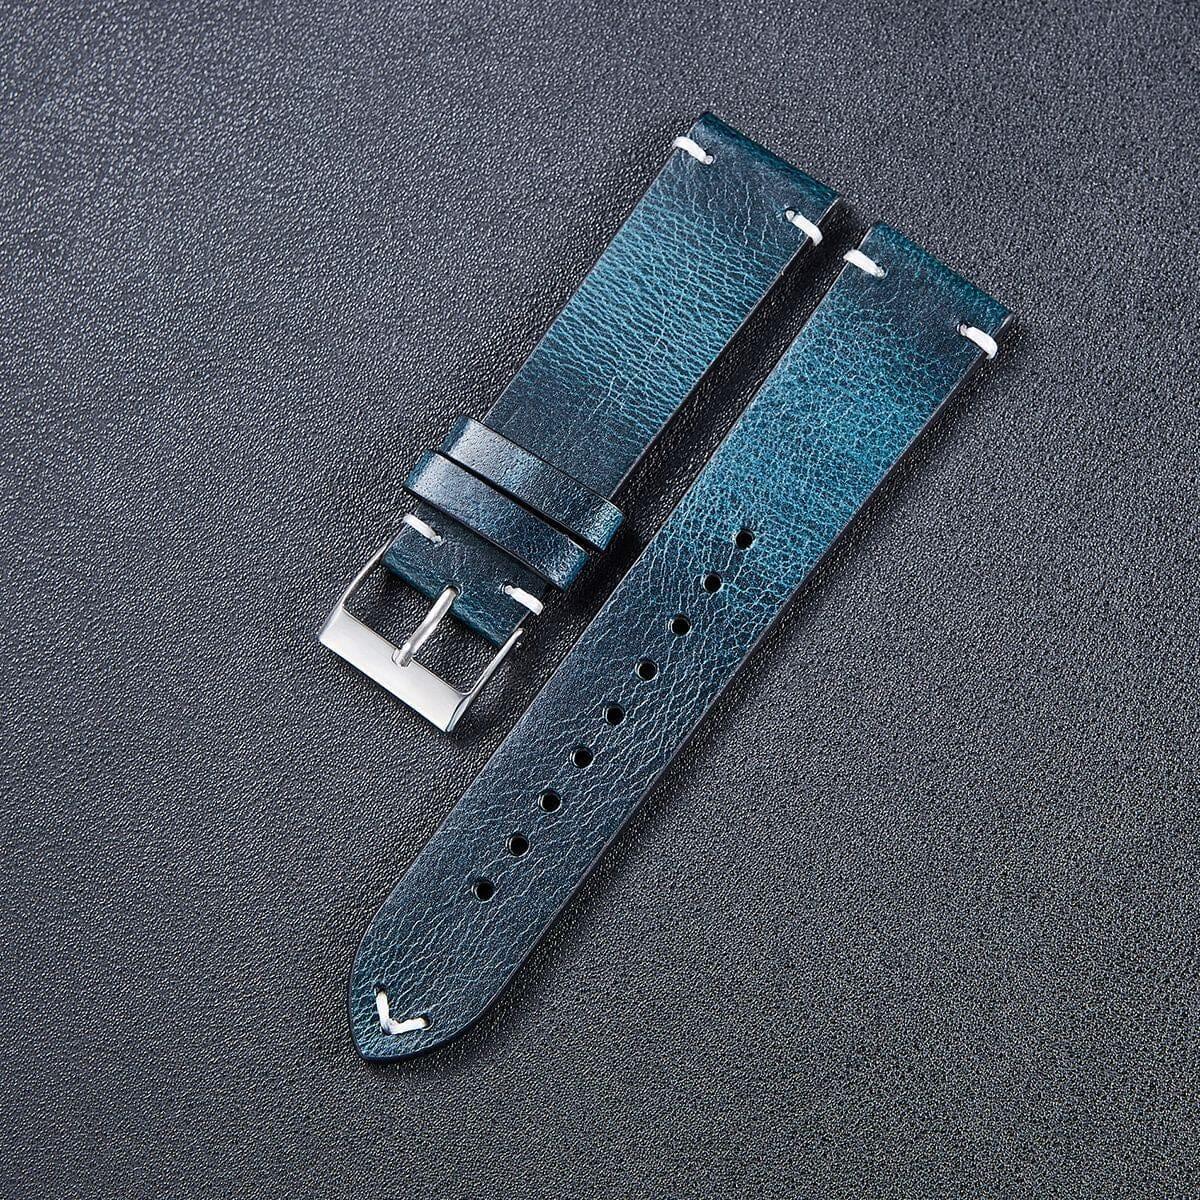 Vintage Oiled Leather Watch Straps Compatible with the Suunto 9 Peak Pro